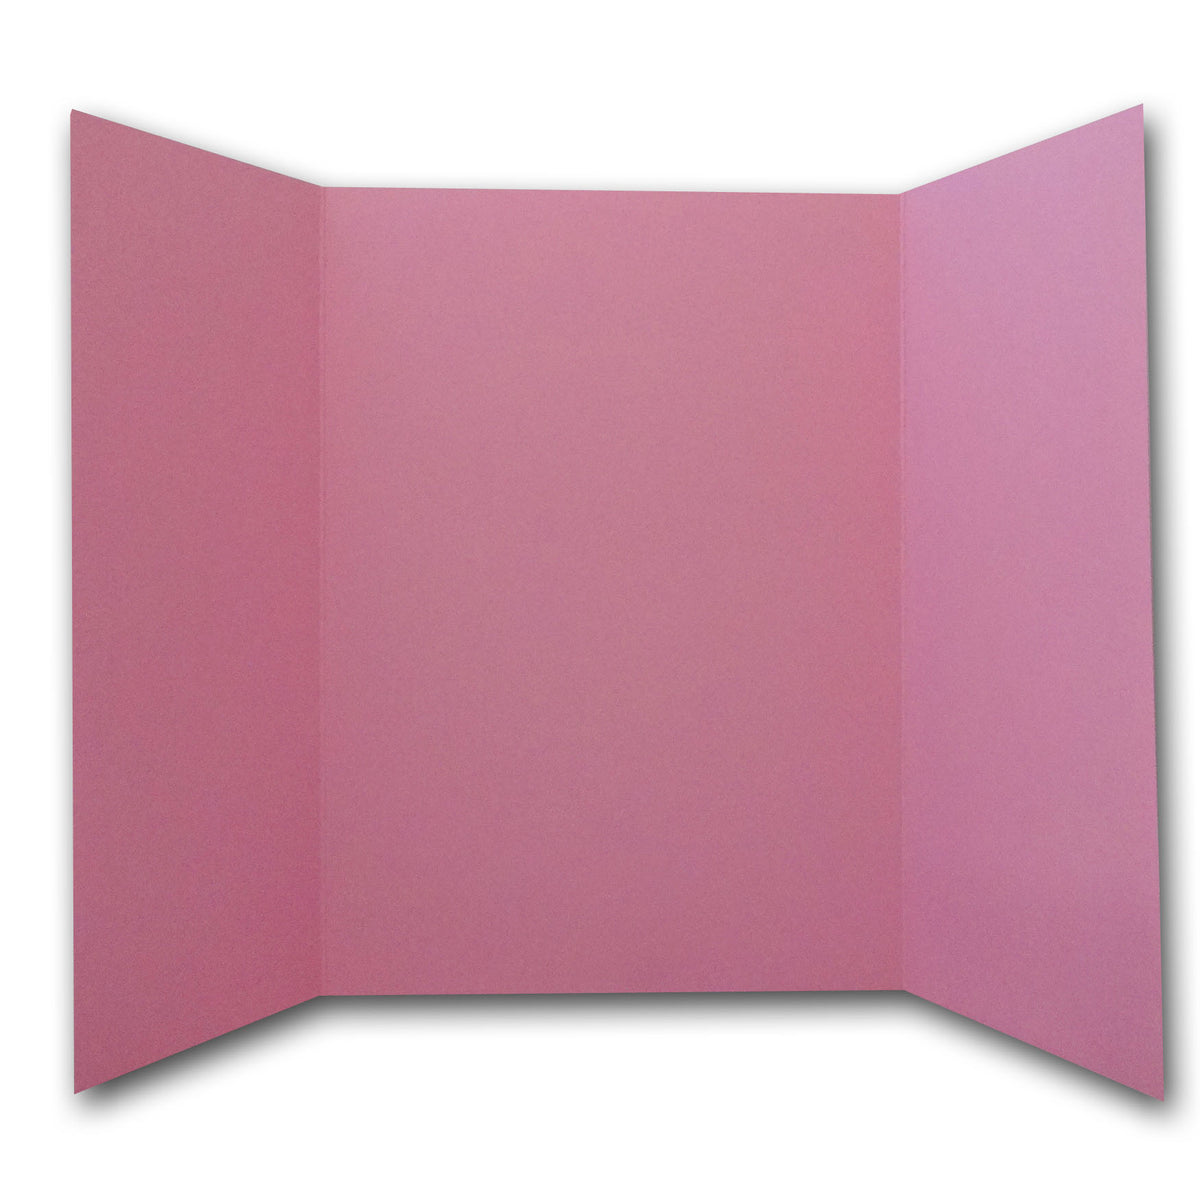 Pink 5x7 Gate Fold Discount Card Stock for DIY Invitations